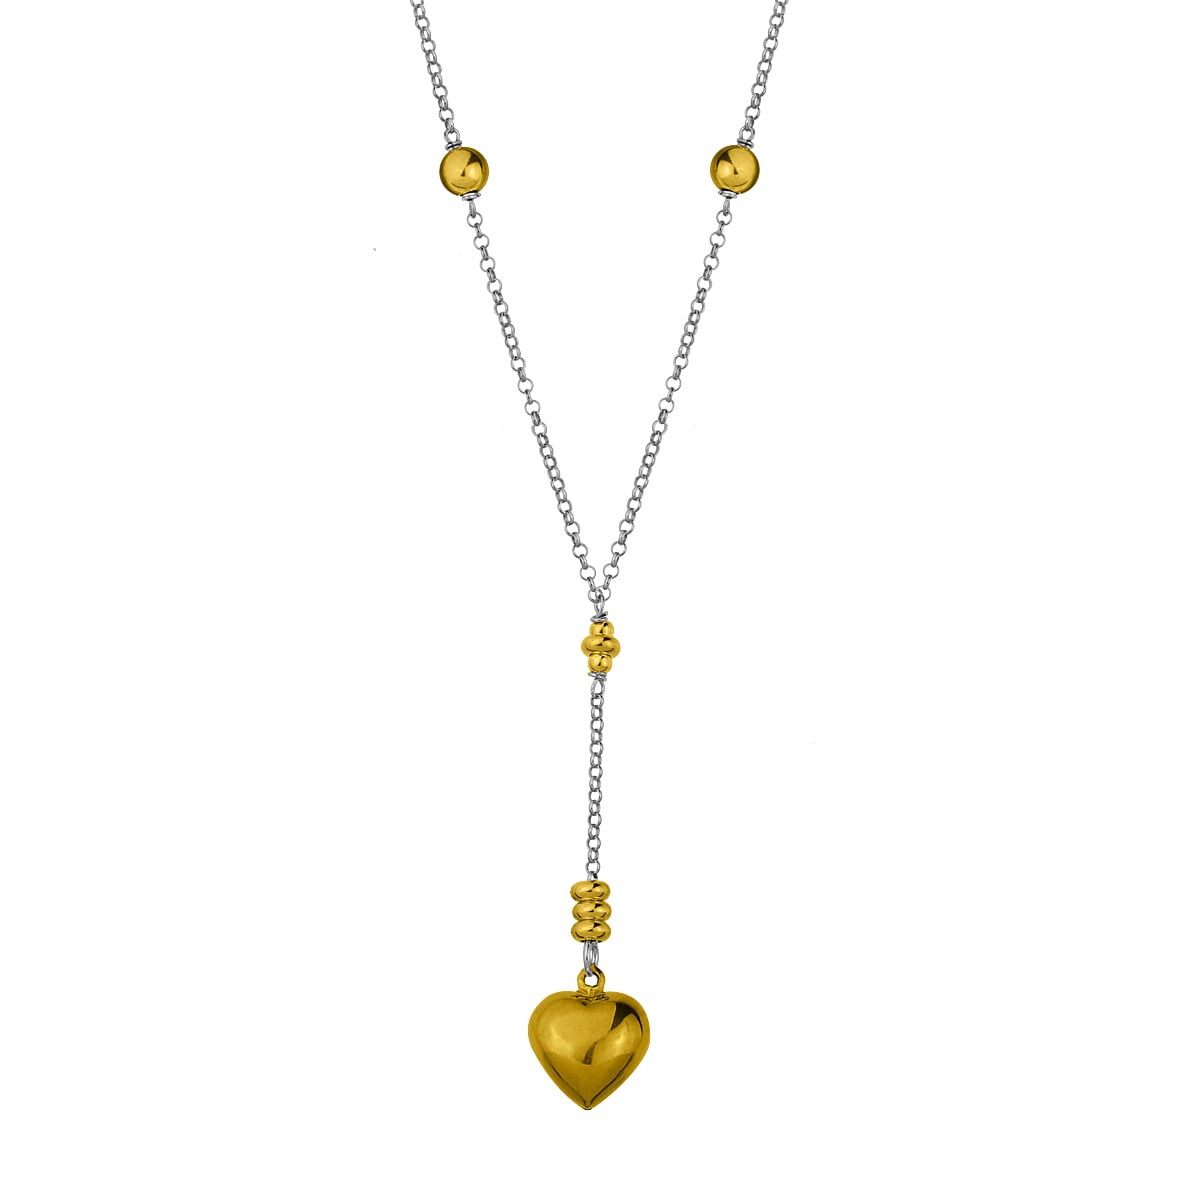 Necklace with a silver plated heart and decorated with gold plated silver balls and grommets.